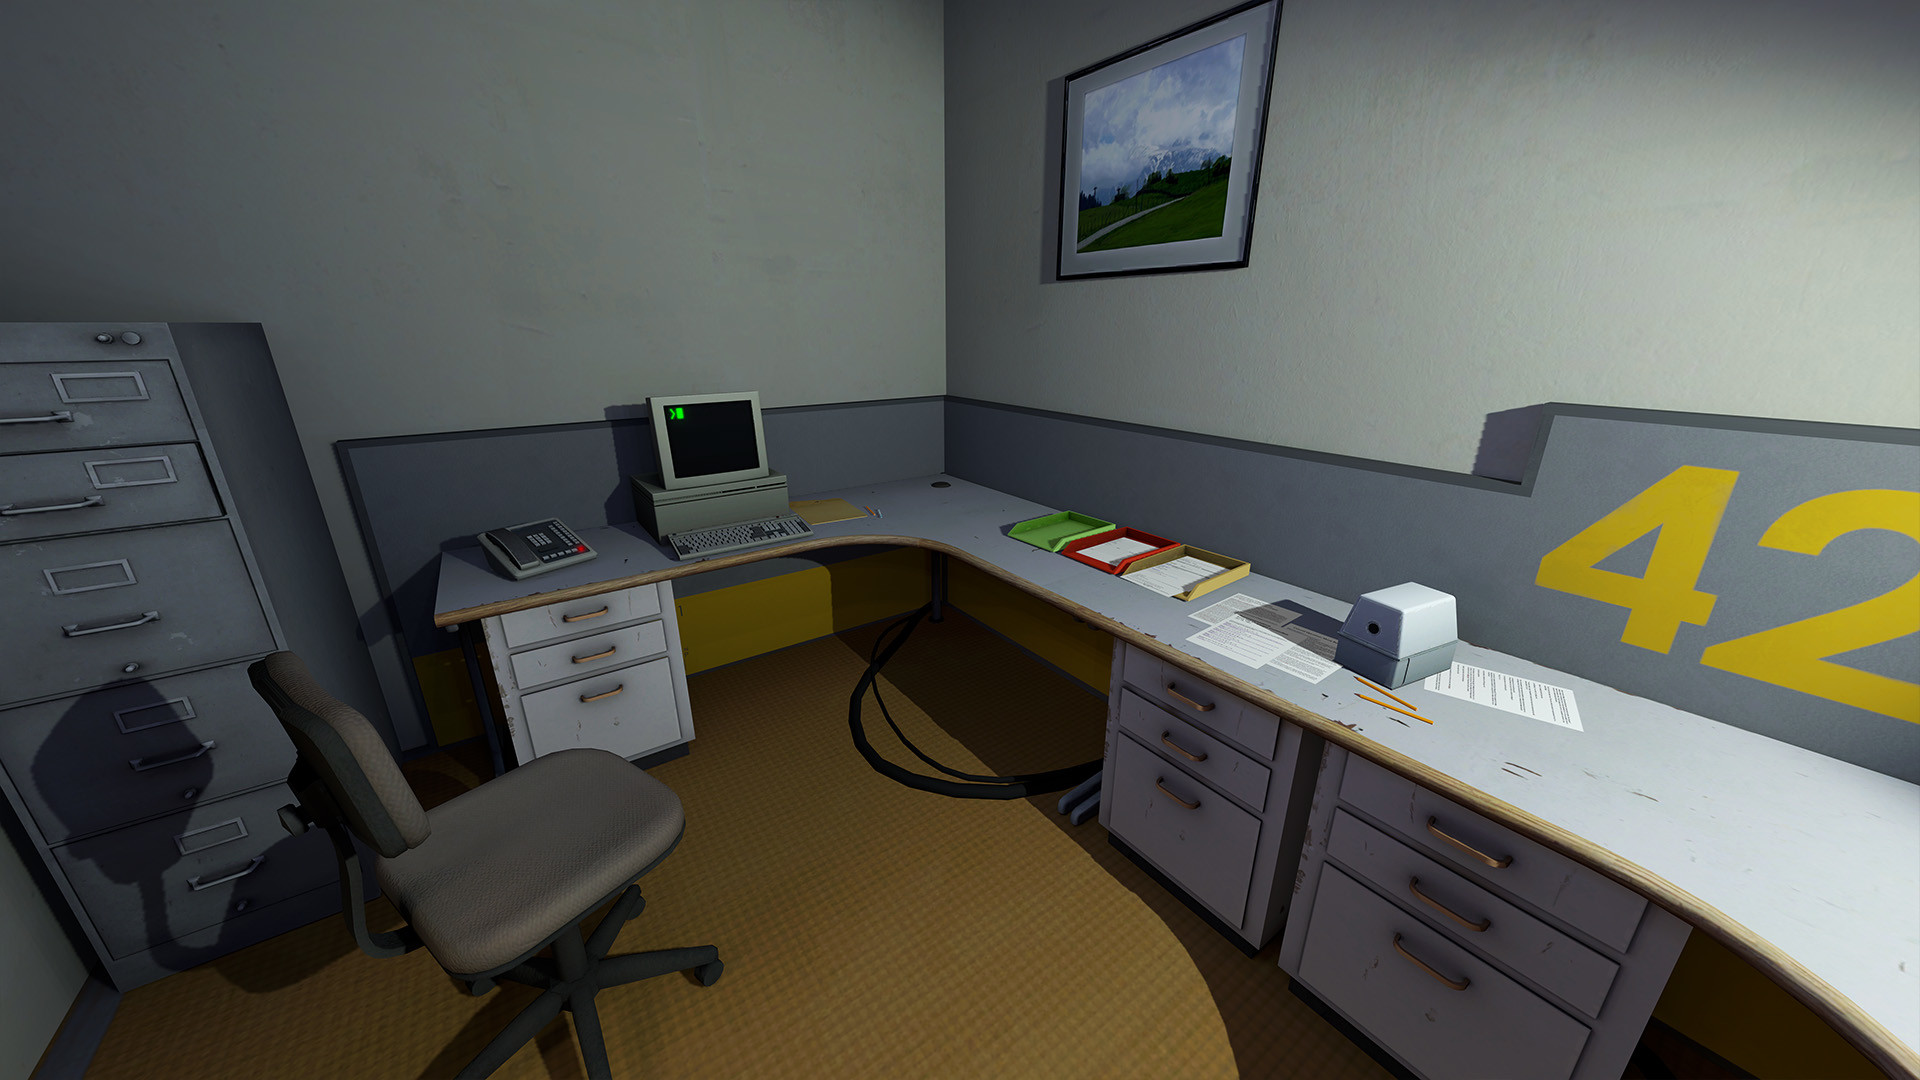 The Stanley Parable: Ultra Deluxe Steam Altergift